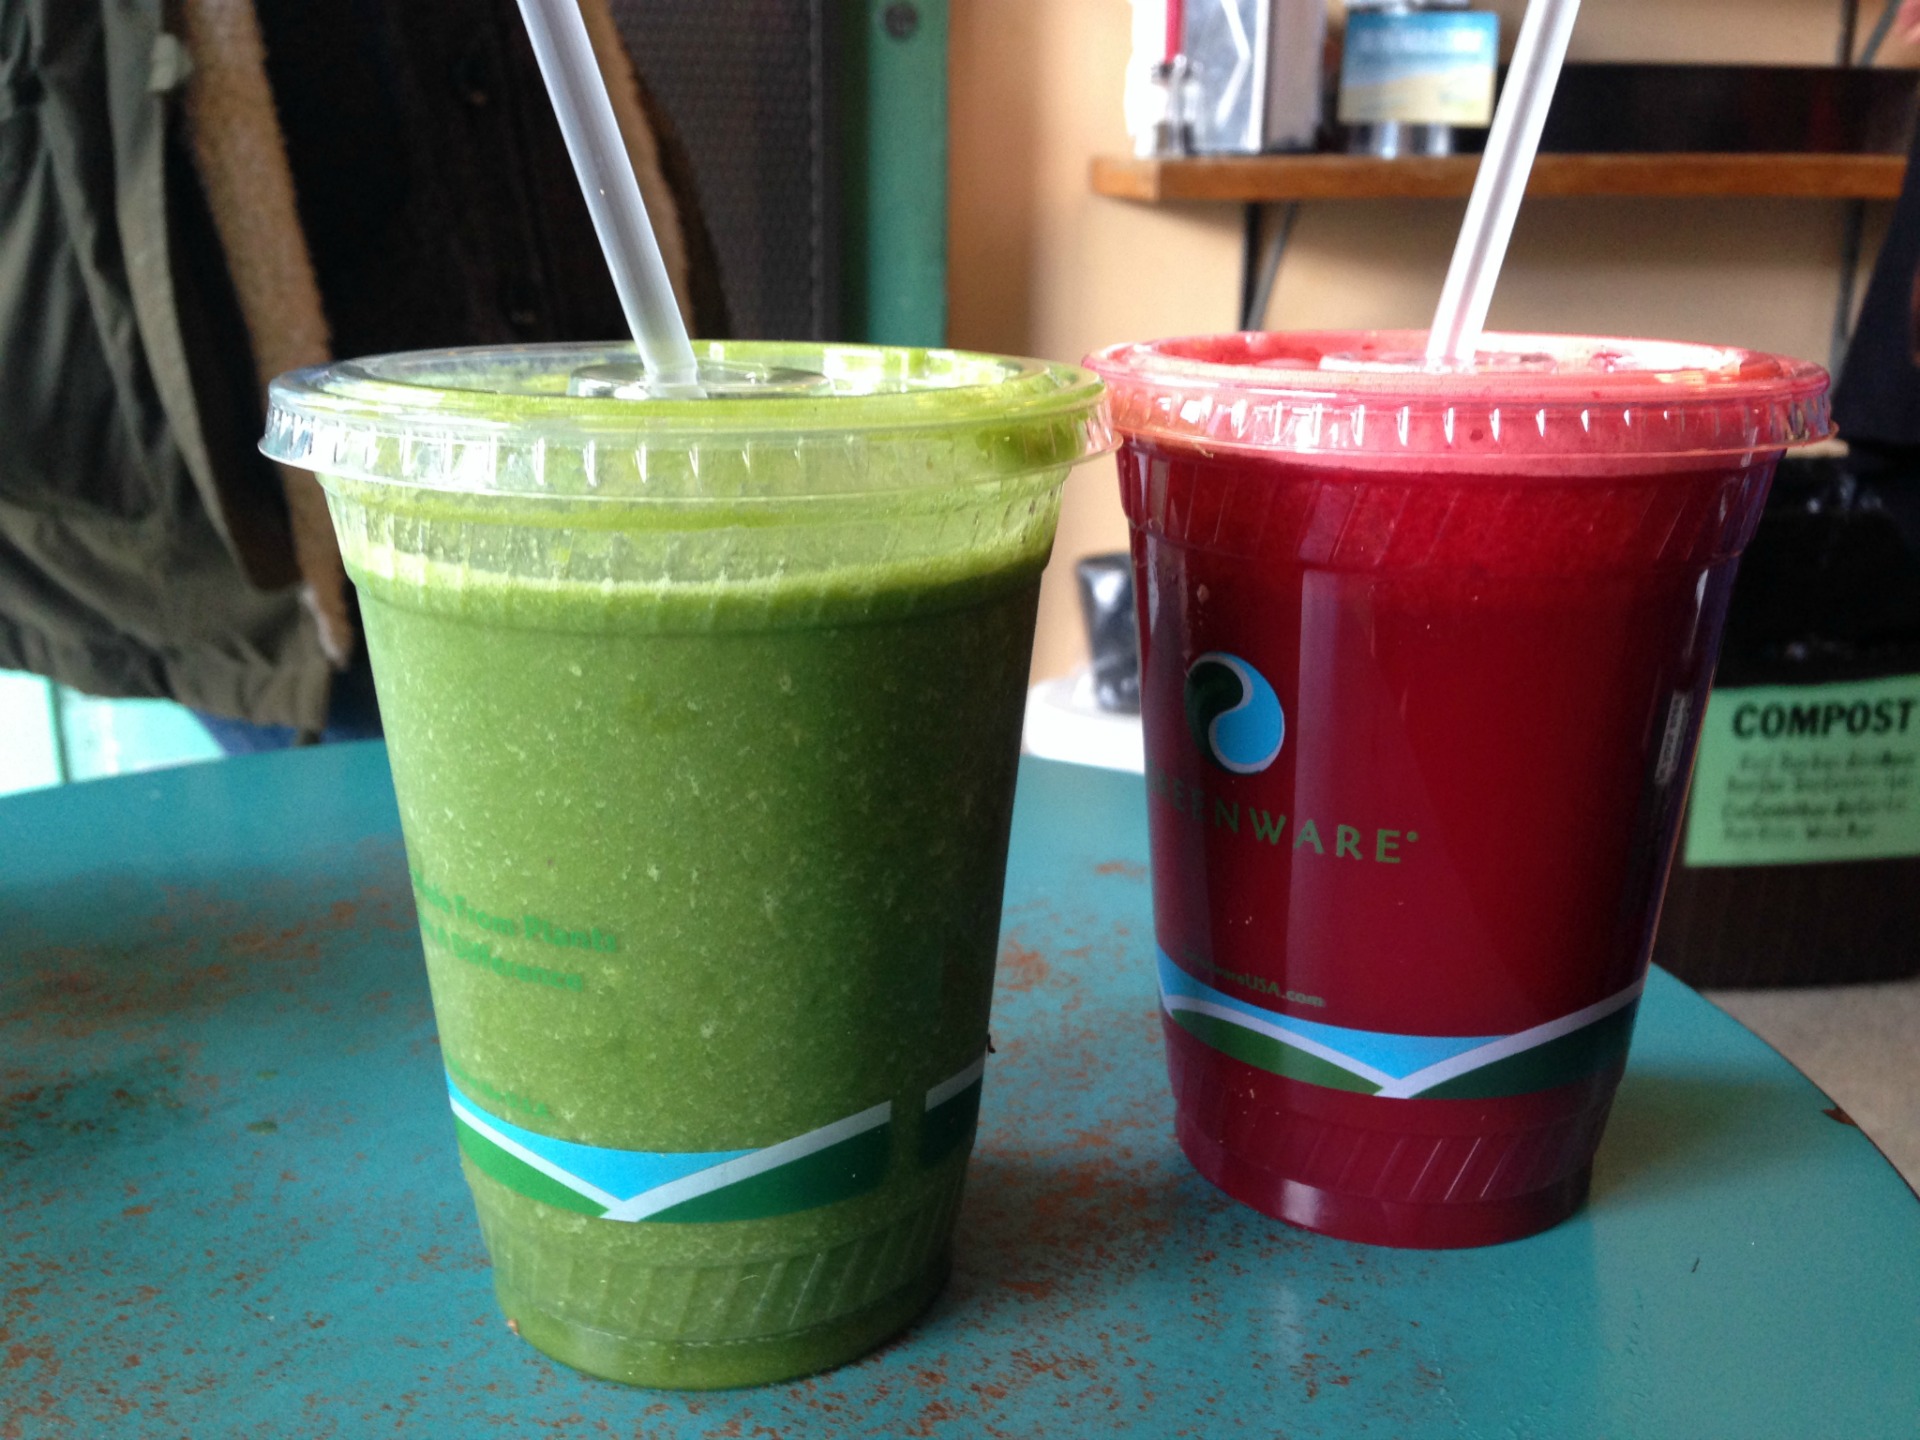 A JBC kale smoothie and Veggie Patch from North Berkeley's Juice Bar Collective